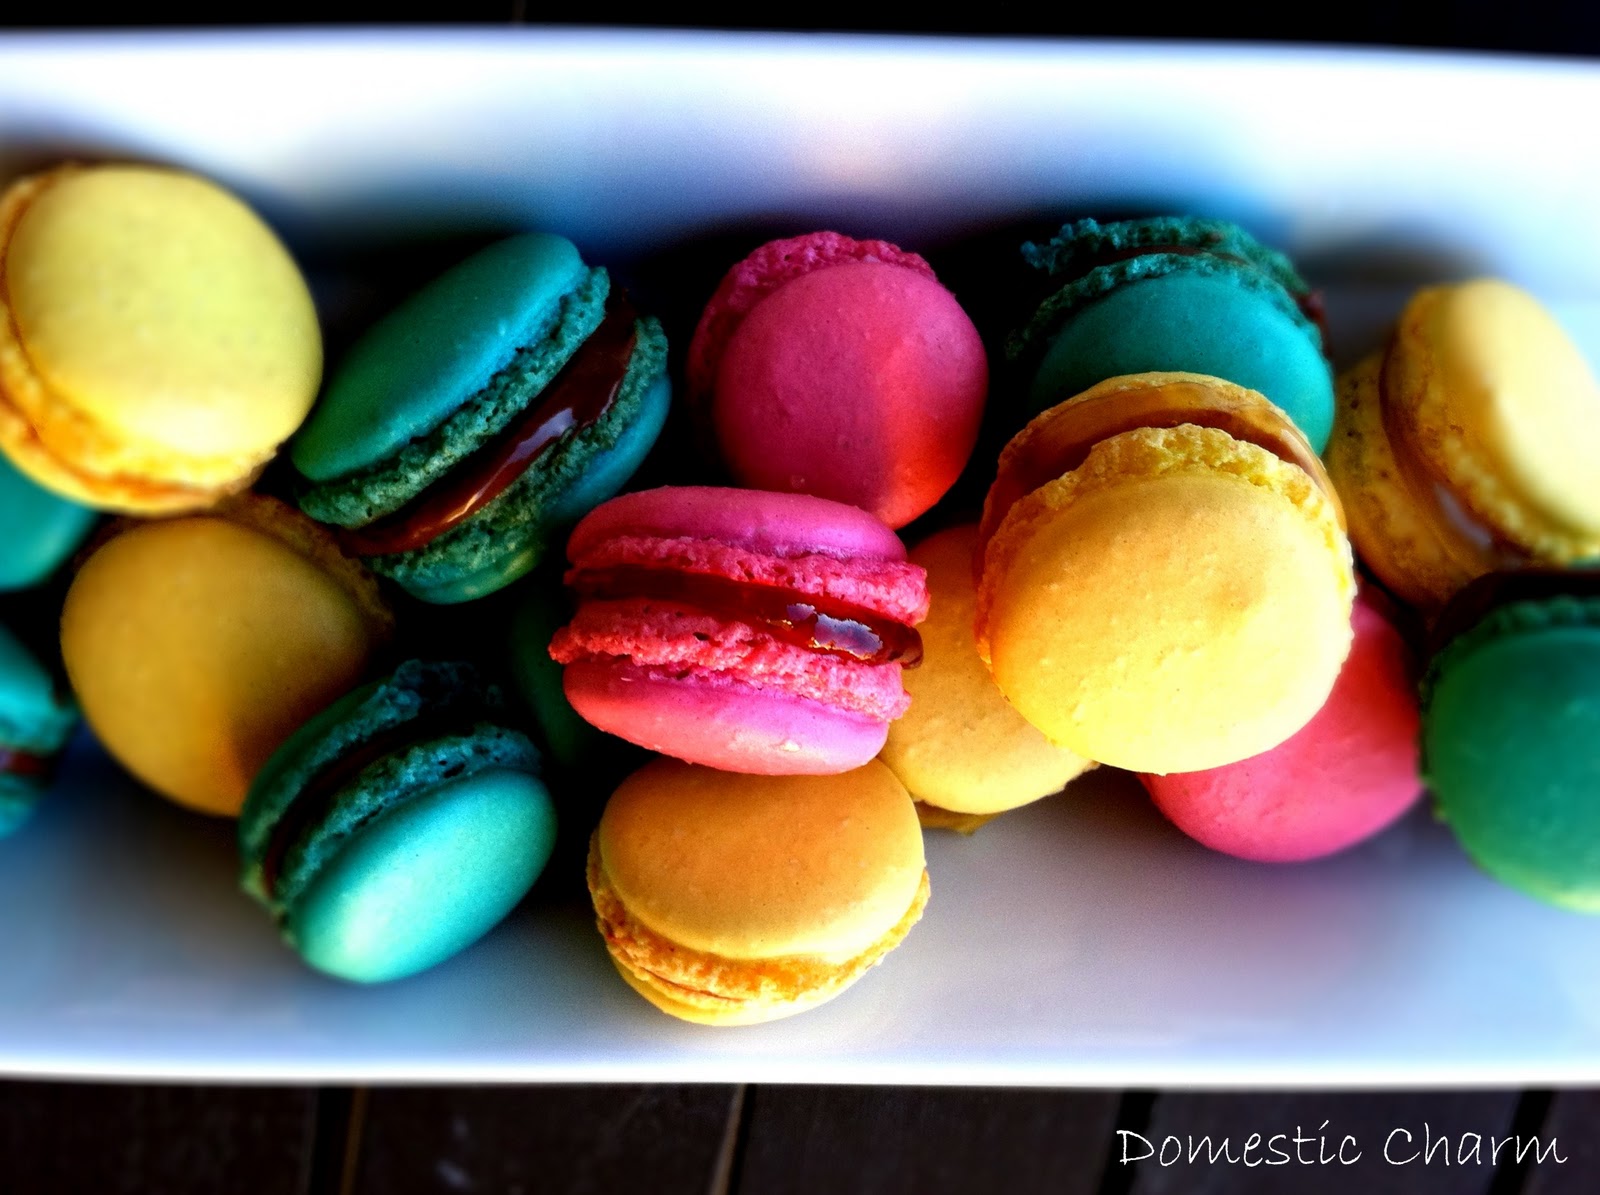 Domestic Charm: French Macarons